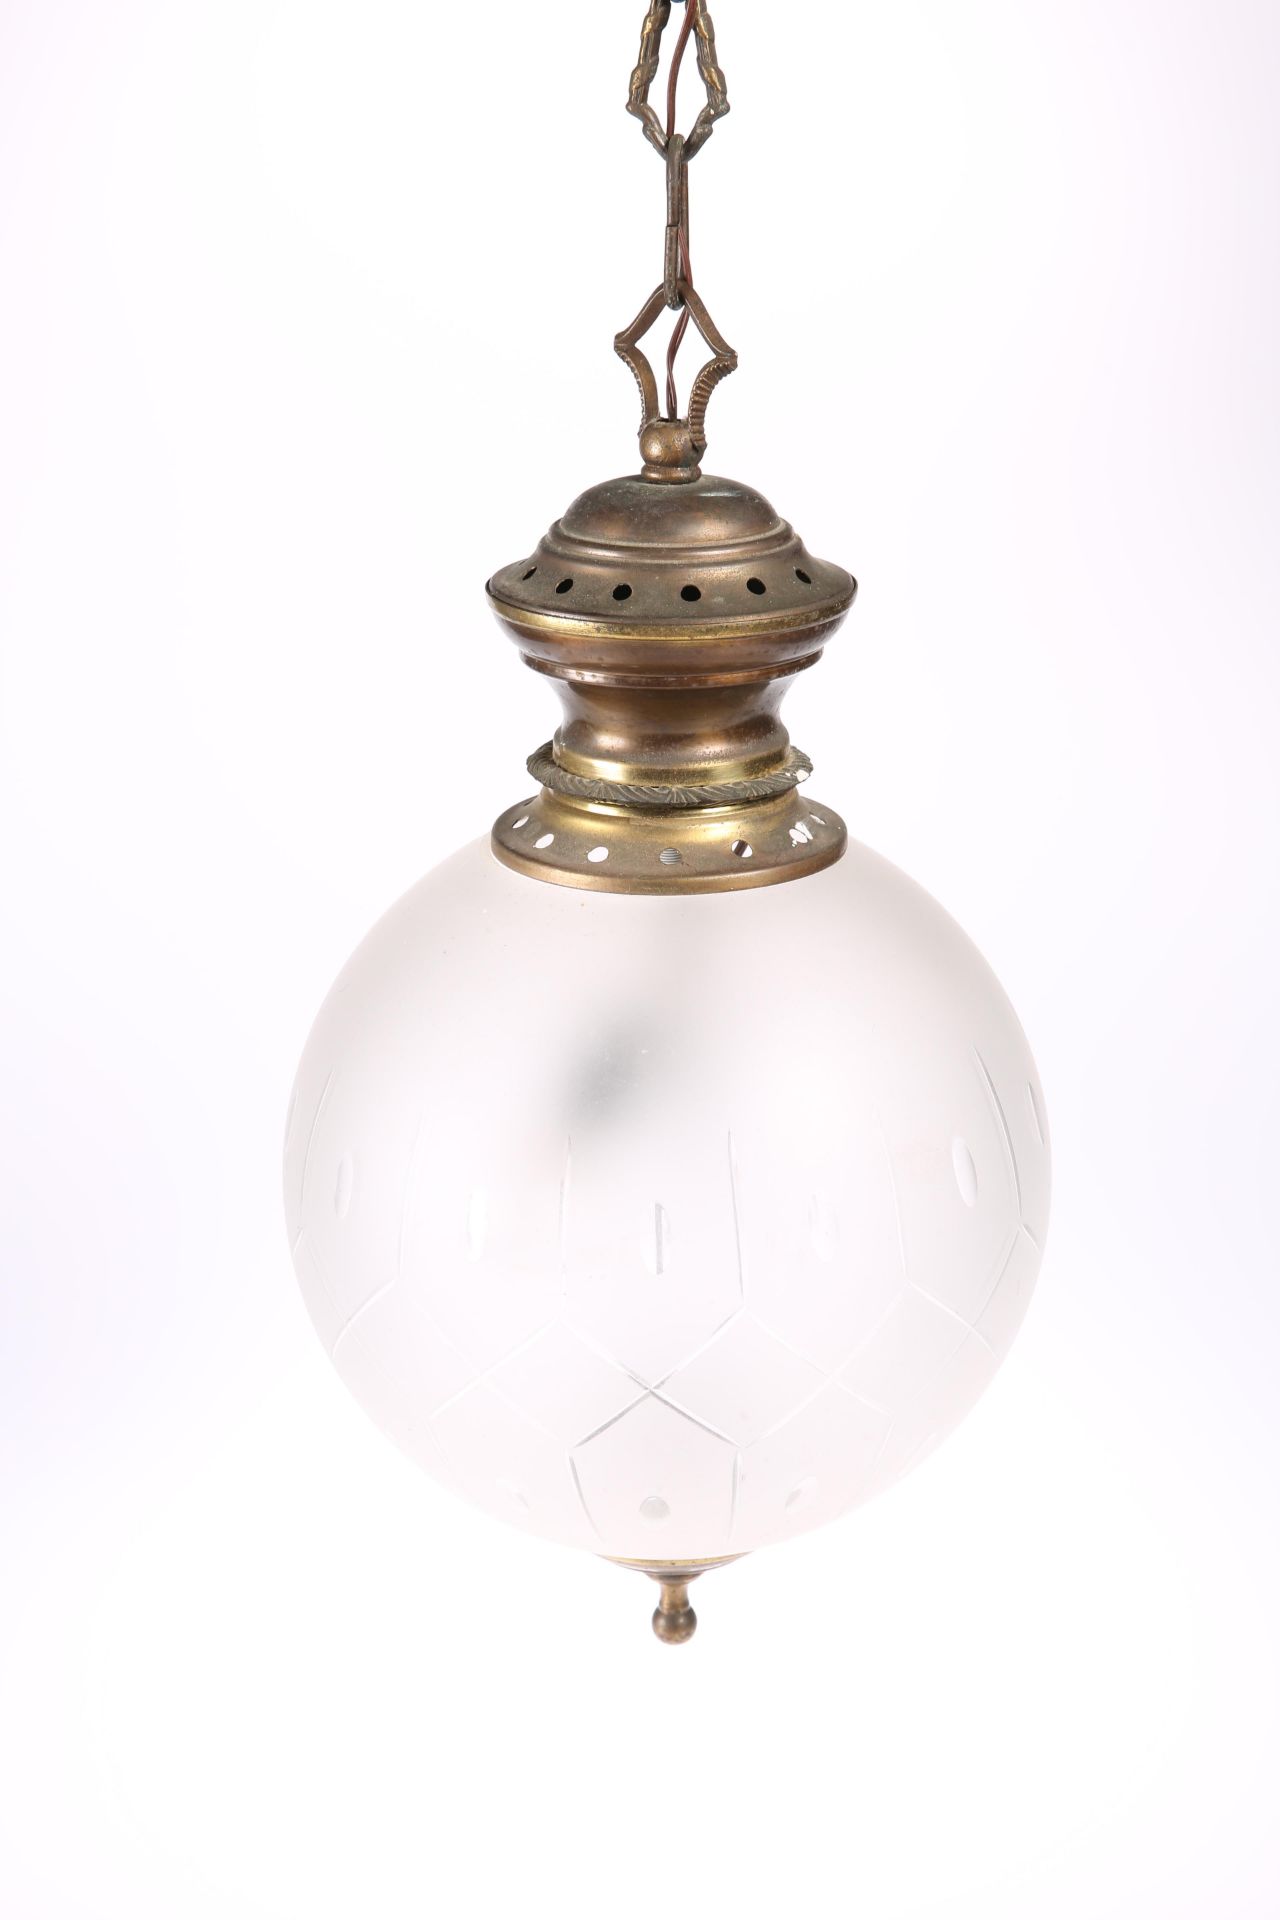 AN EARLY 20TH CENTURY BRASS AND FROSTED GLASS PENDANT CEILING LIGHT, the globular shade with oval